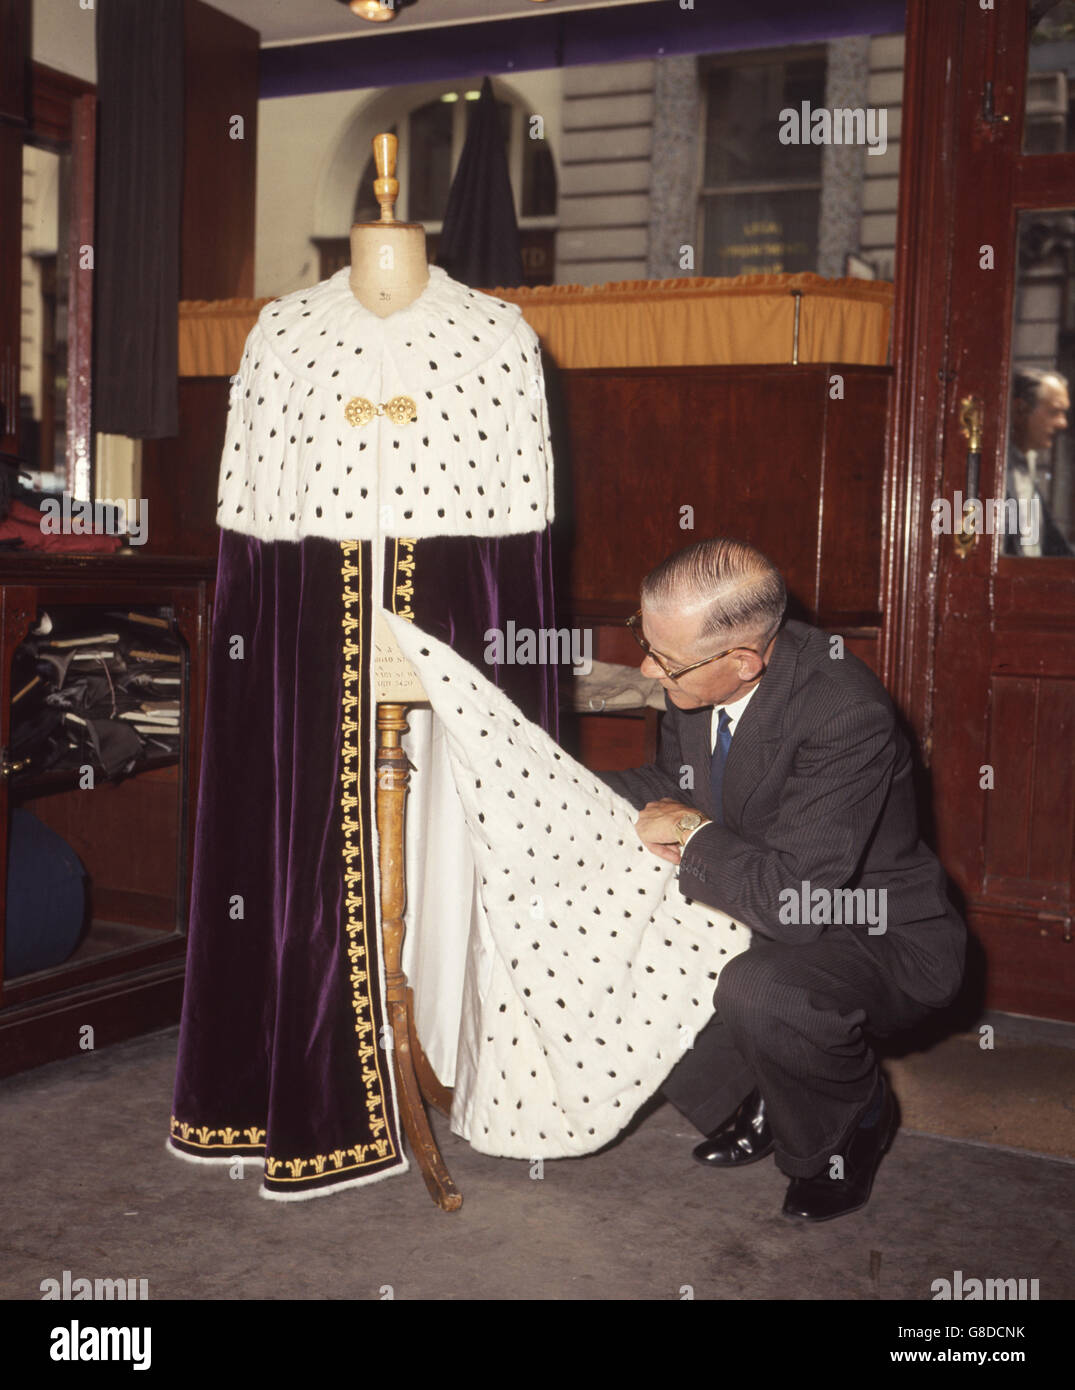 The Mantle for Prince Charles' investiture as Prince of Wales, seen at Ede & Ravenscroft London robe makers. It is hand woven in Royal purple silk velvet (from Warners, Braintree, Essex). Prince of Wales feathers are in gold wire. Collar secured by 18t Welsh gold classed at the 1911 investiture. Stock Photo